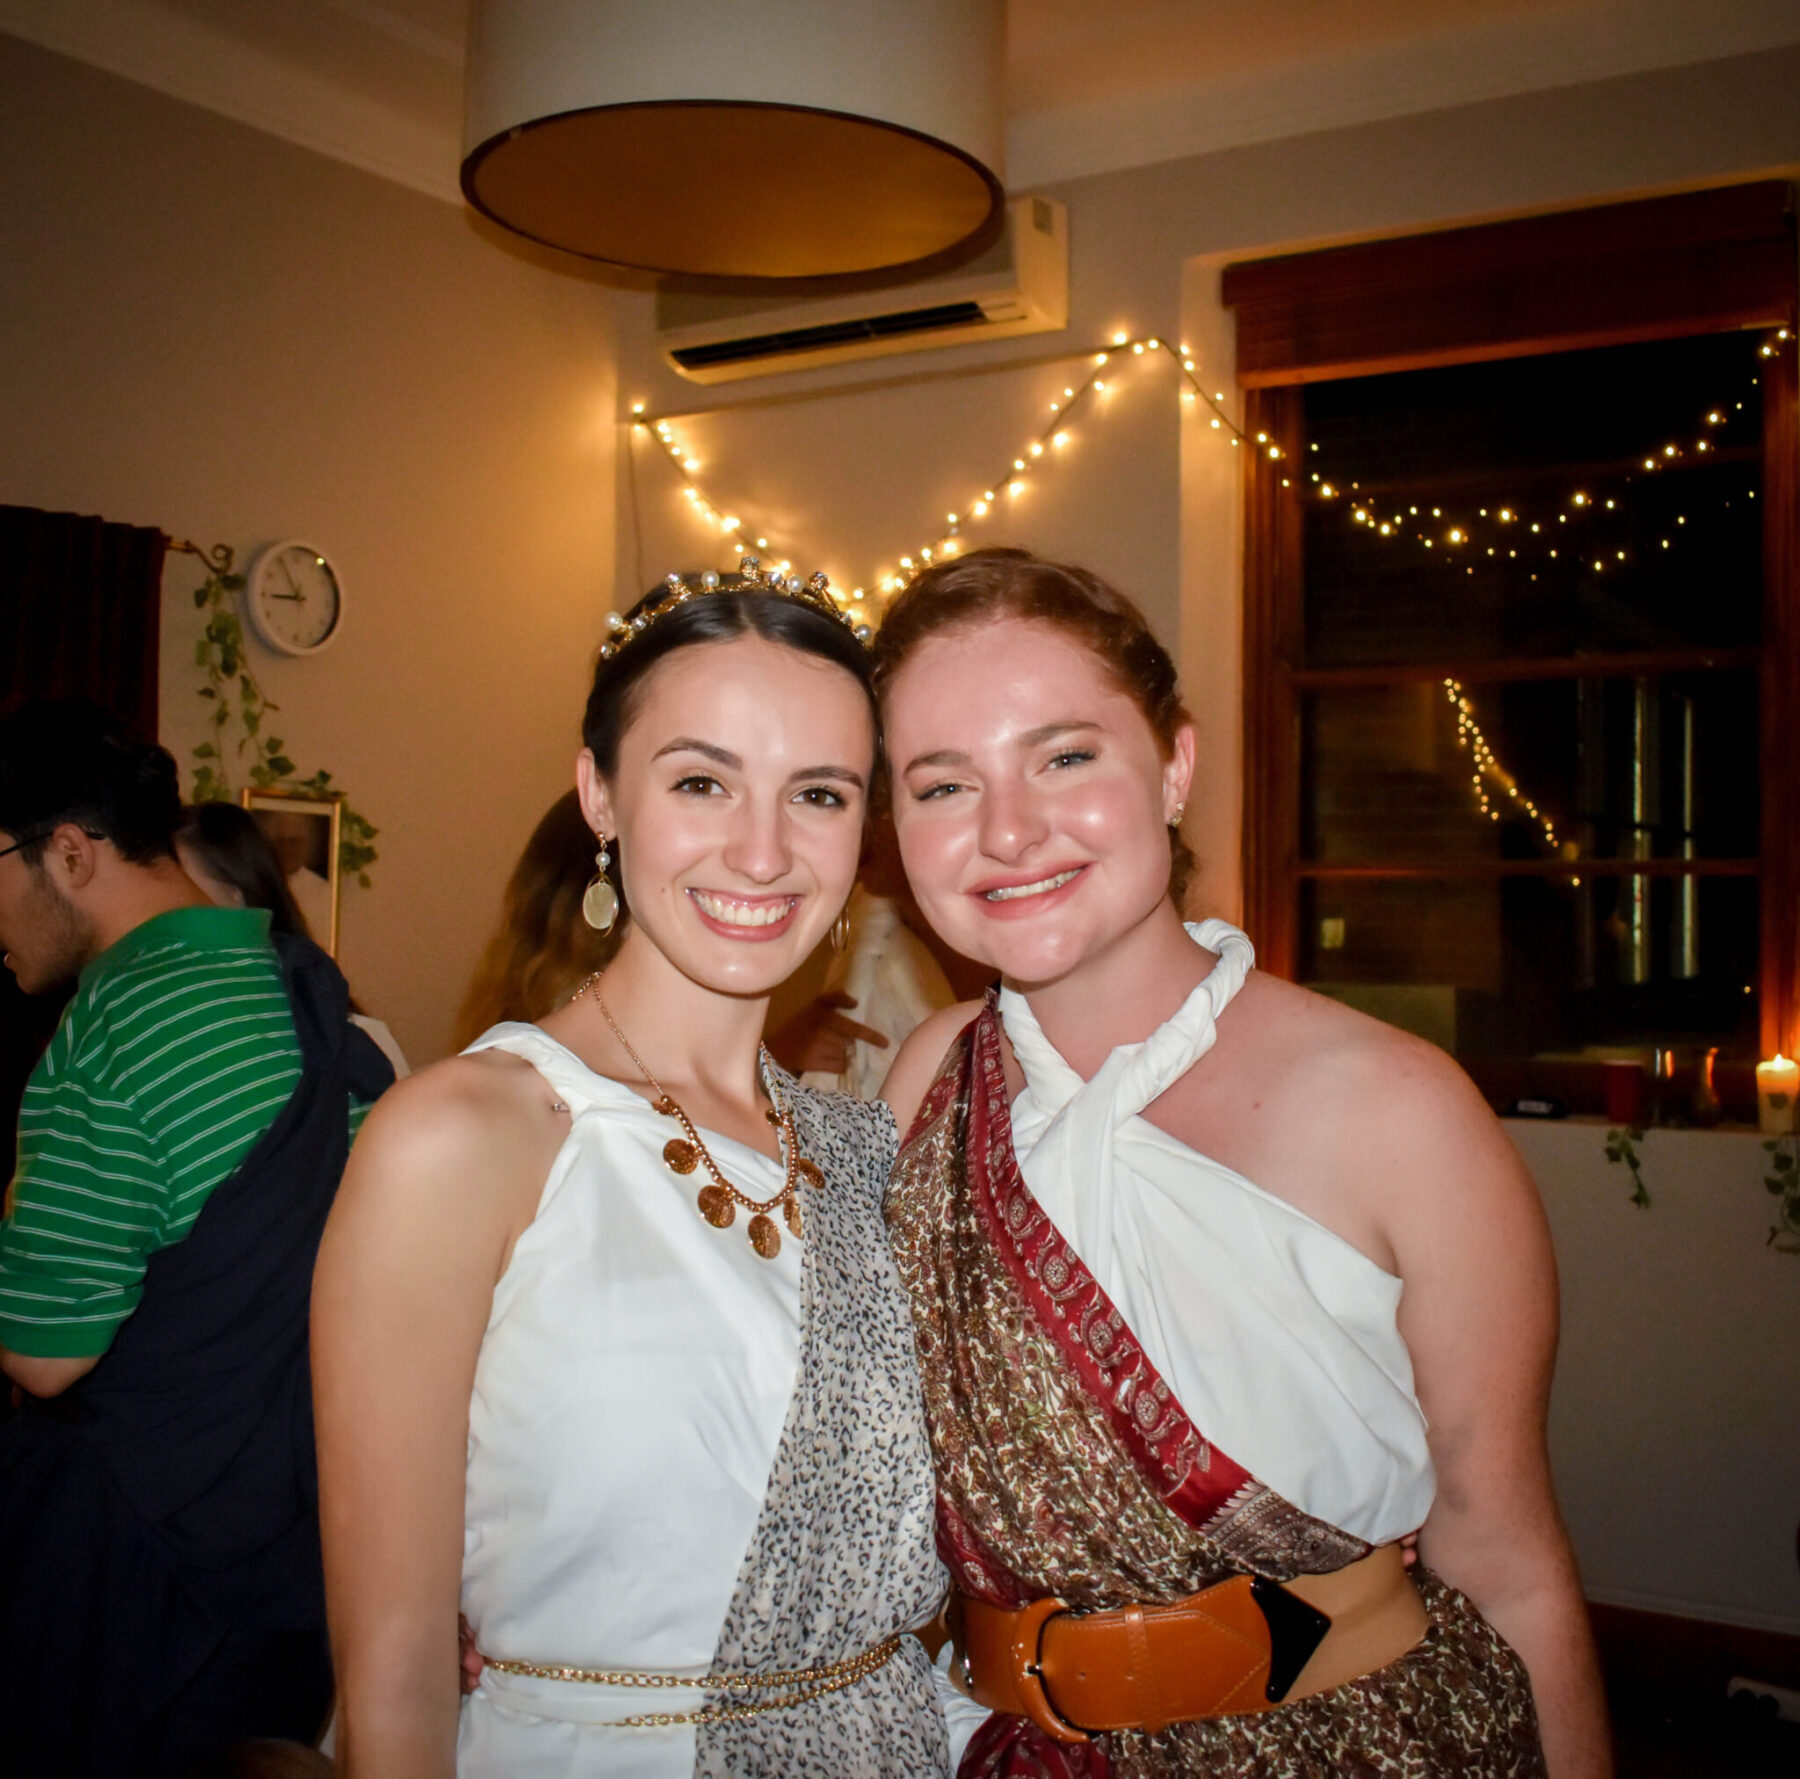 Classics-Week-Toga-Party-2021-Edited-25-scaled-1. Campion College Australia.